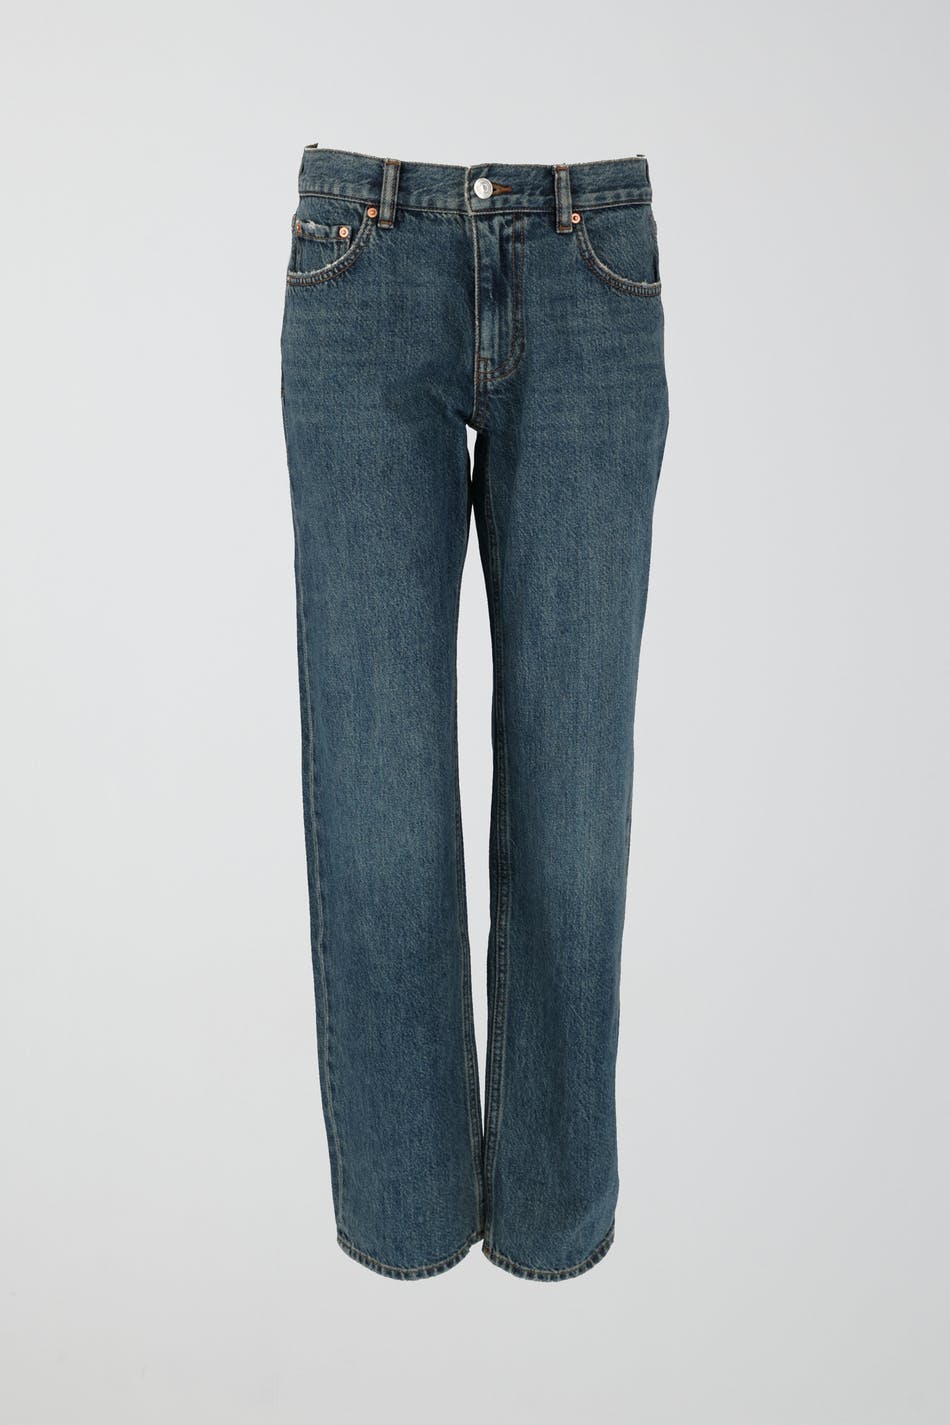 Gina Tricot - Low straight petite jeans - low-straight-jeans - Blue - 44 - Female